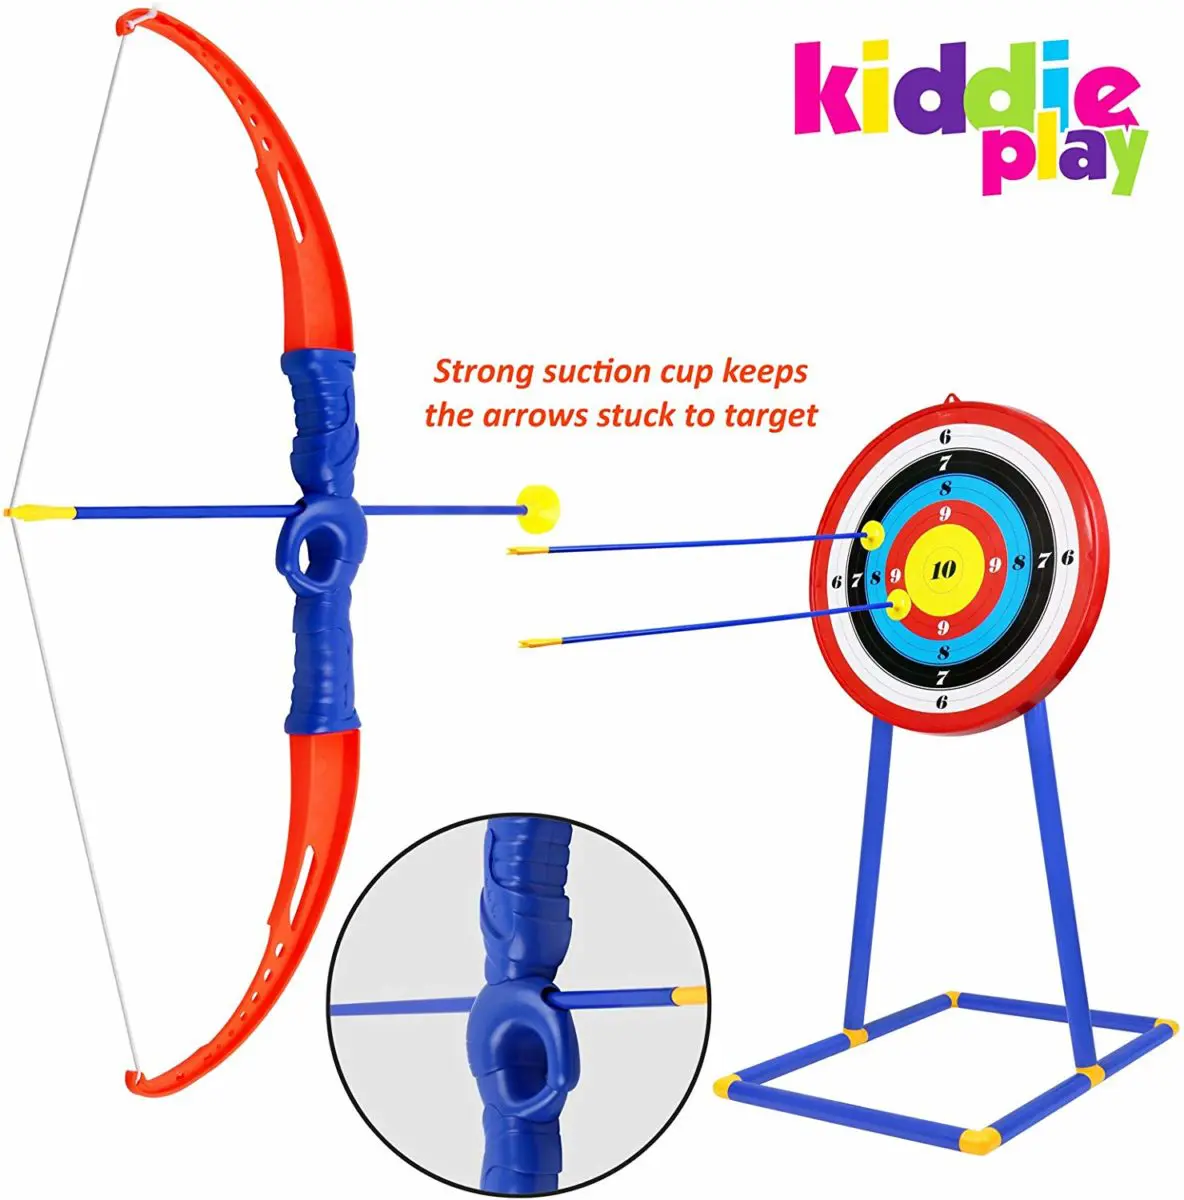 Kiddie Play Toy Archery Set - Top Toys and Gifts for Four Year Old Boys 2